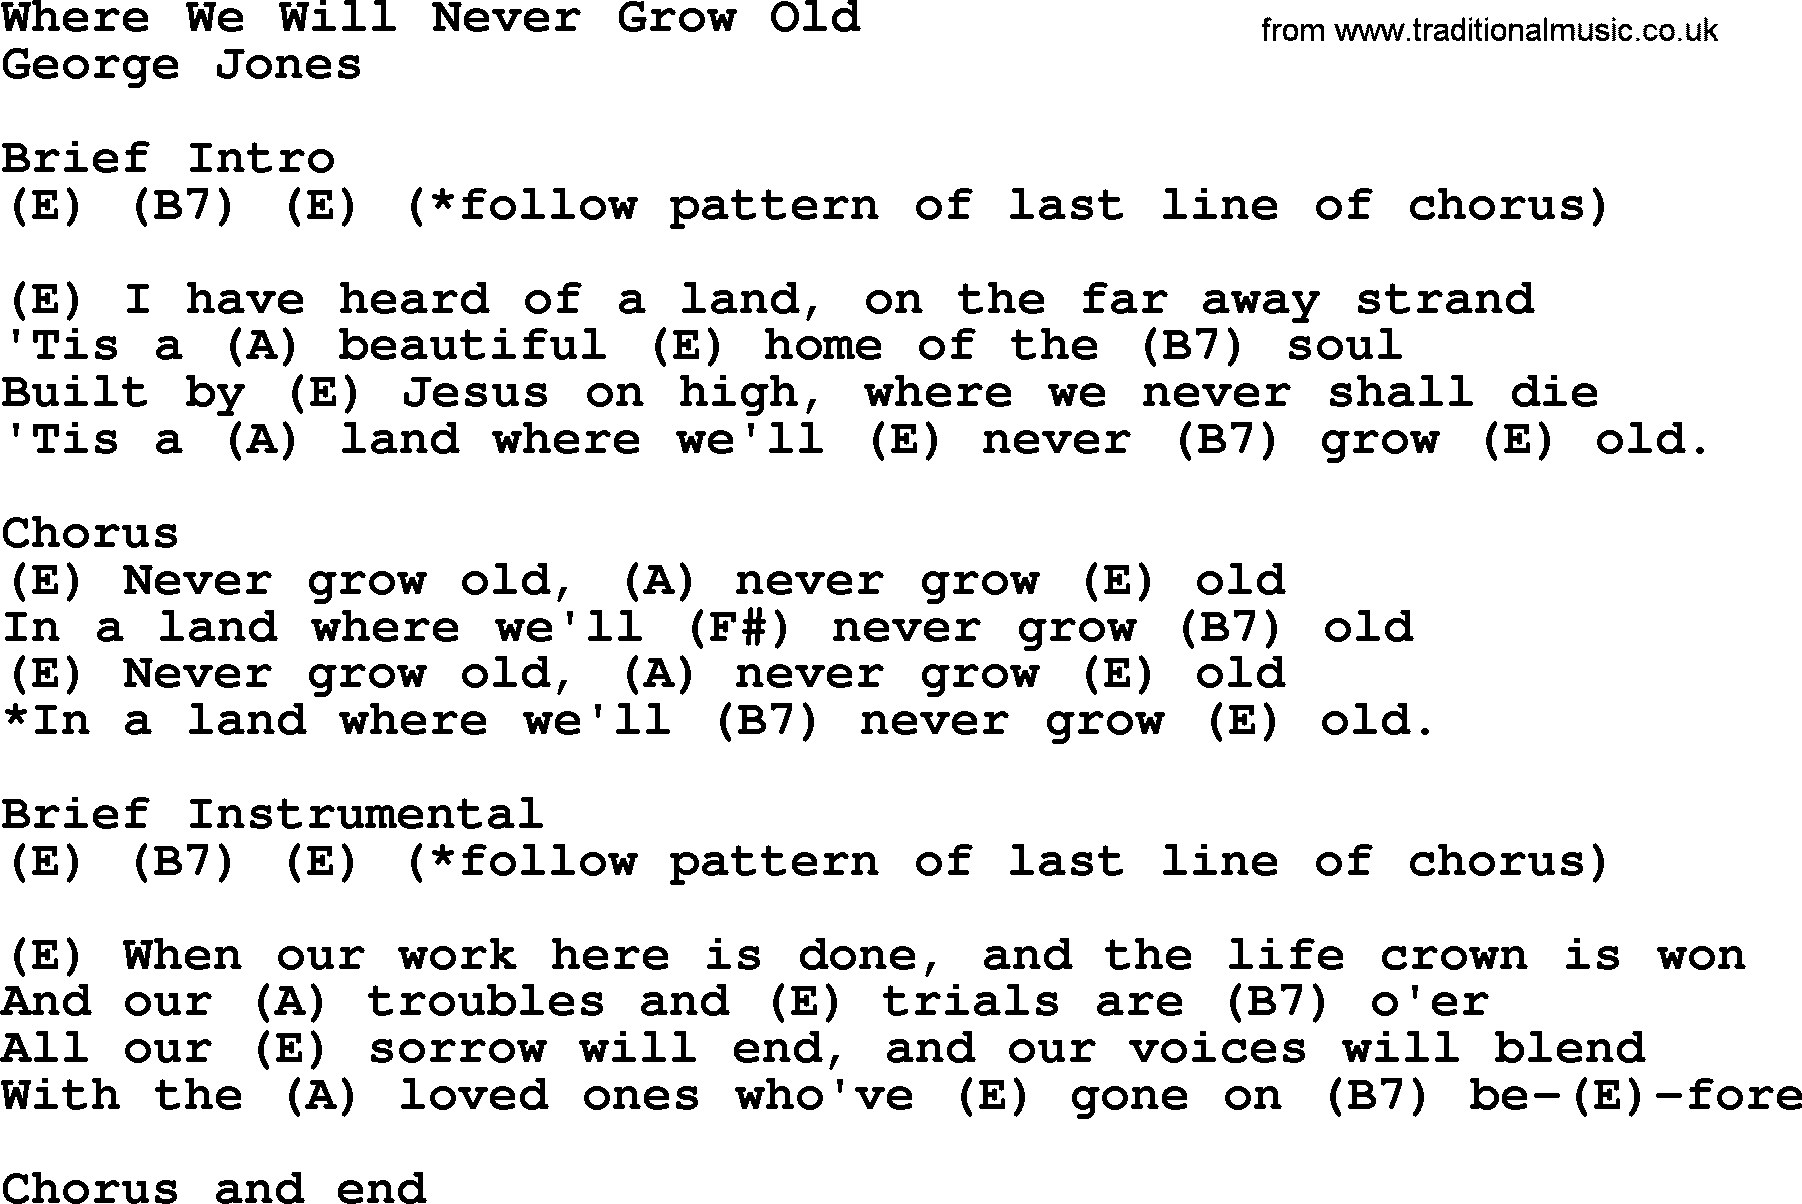 George Jones song: Where We Will Never Grow Old, lyrics and chords